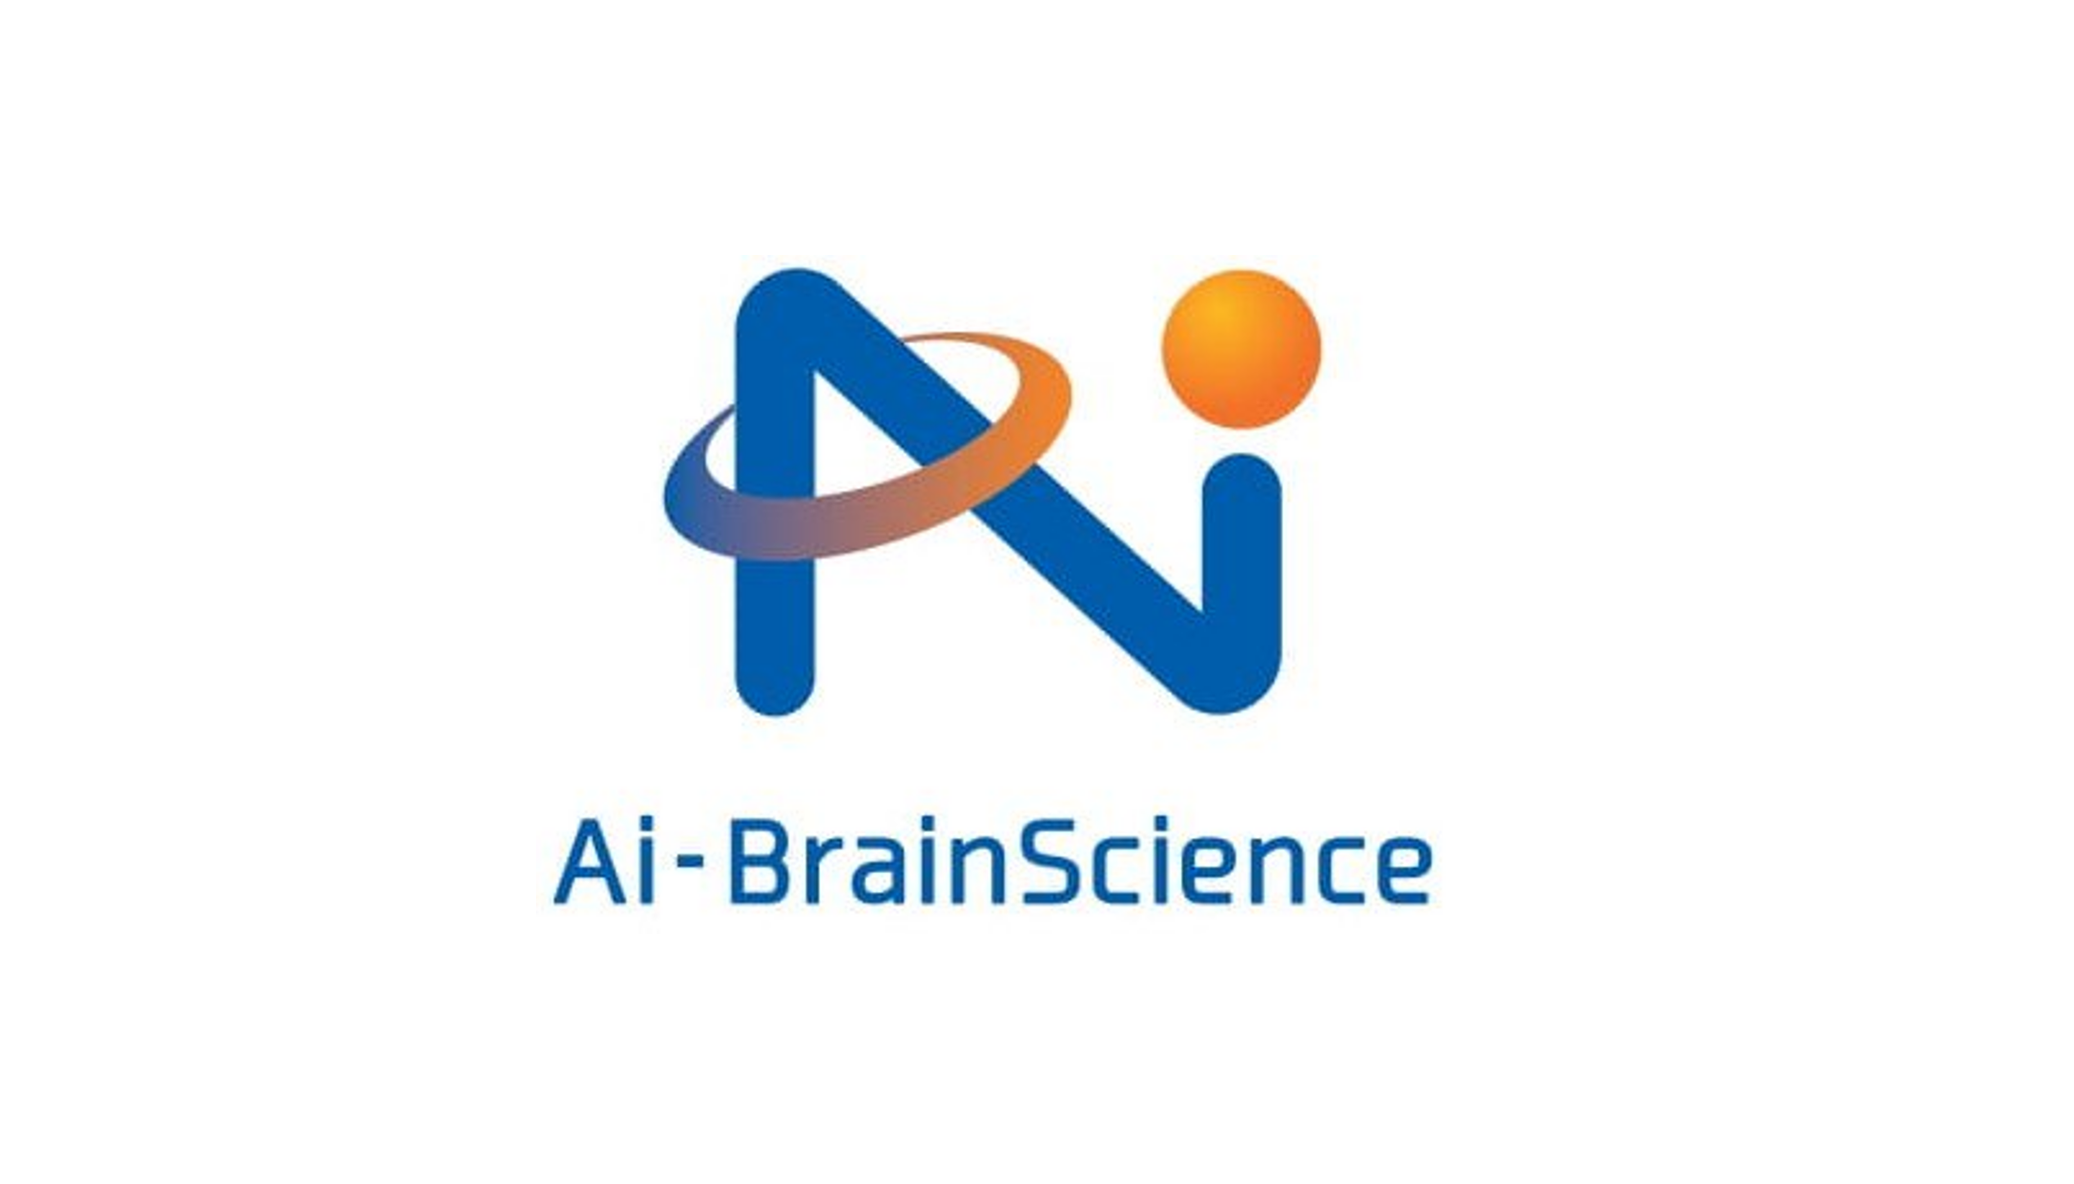 Ai-Brain Science Co., Ltd. won “The Japan Medical Research and Development Start-up Encouragement Prize” at the Japan Medical Research and Development Grand Prize